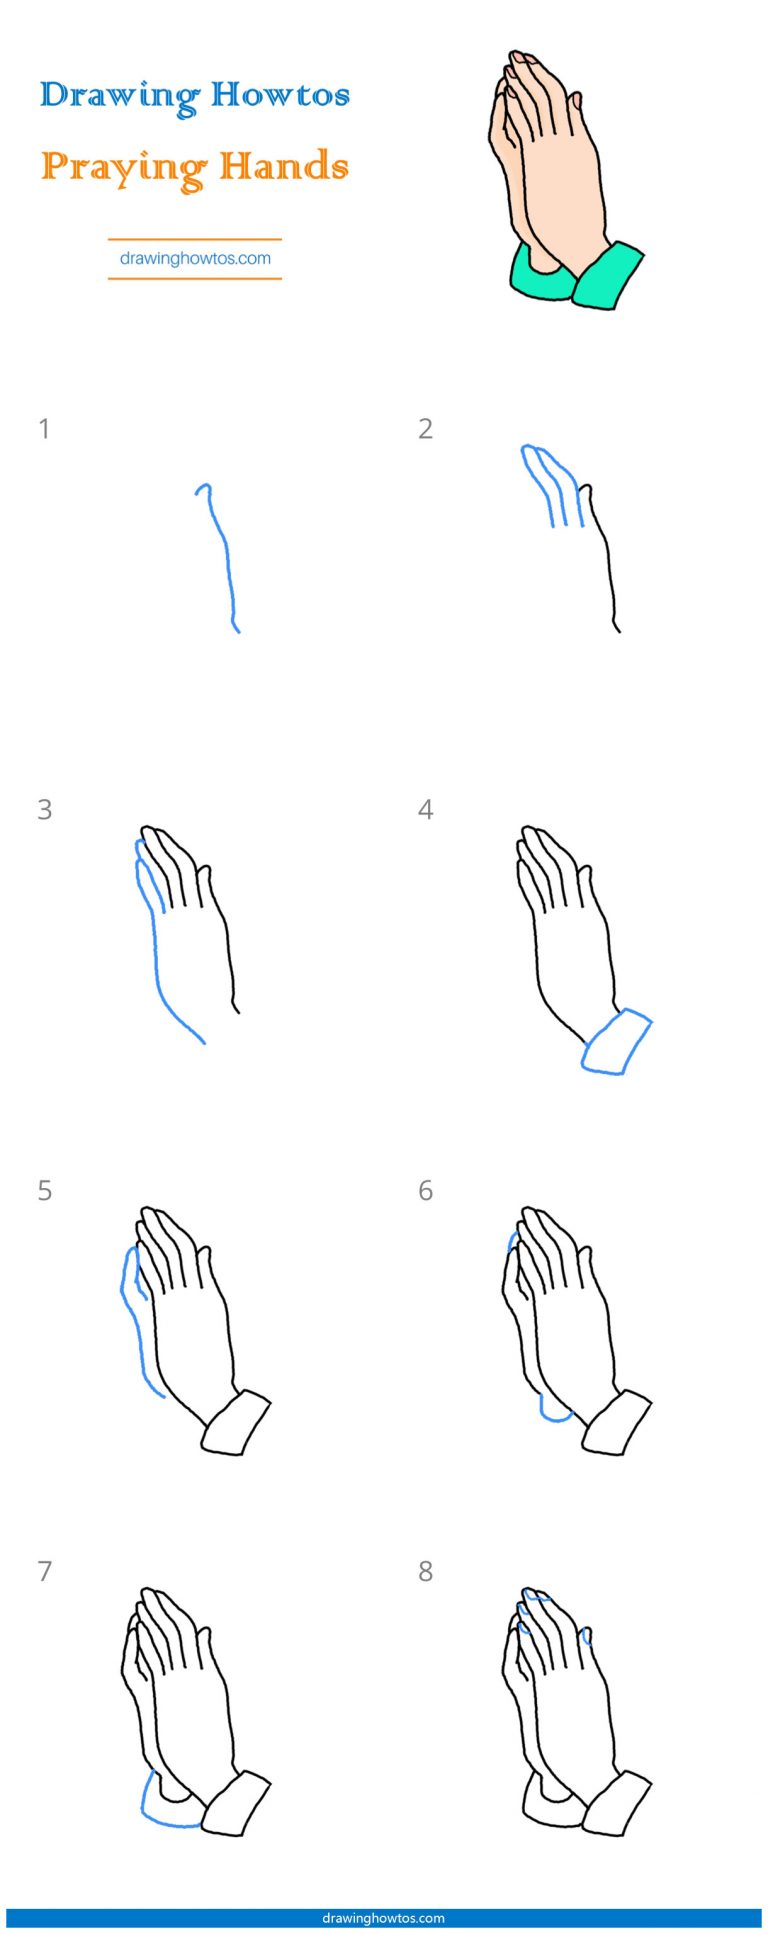 How to Draw Praying Hands Step by Step Easy Drawing Guides Drawing